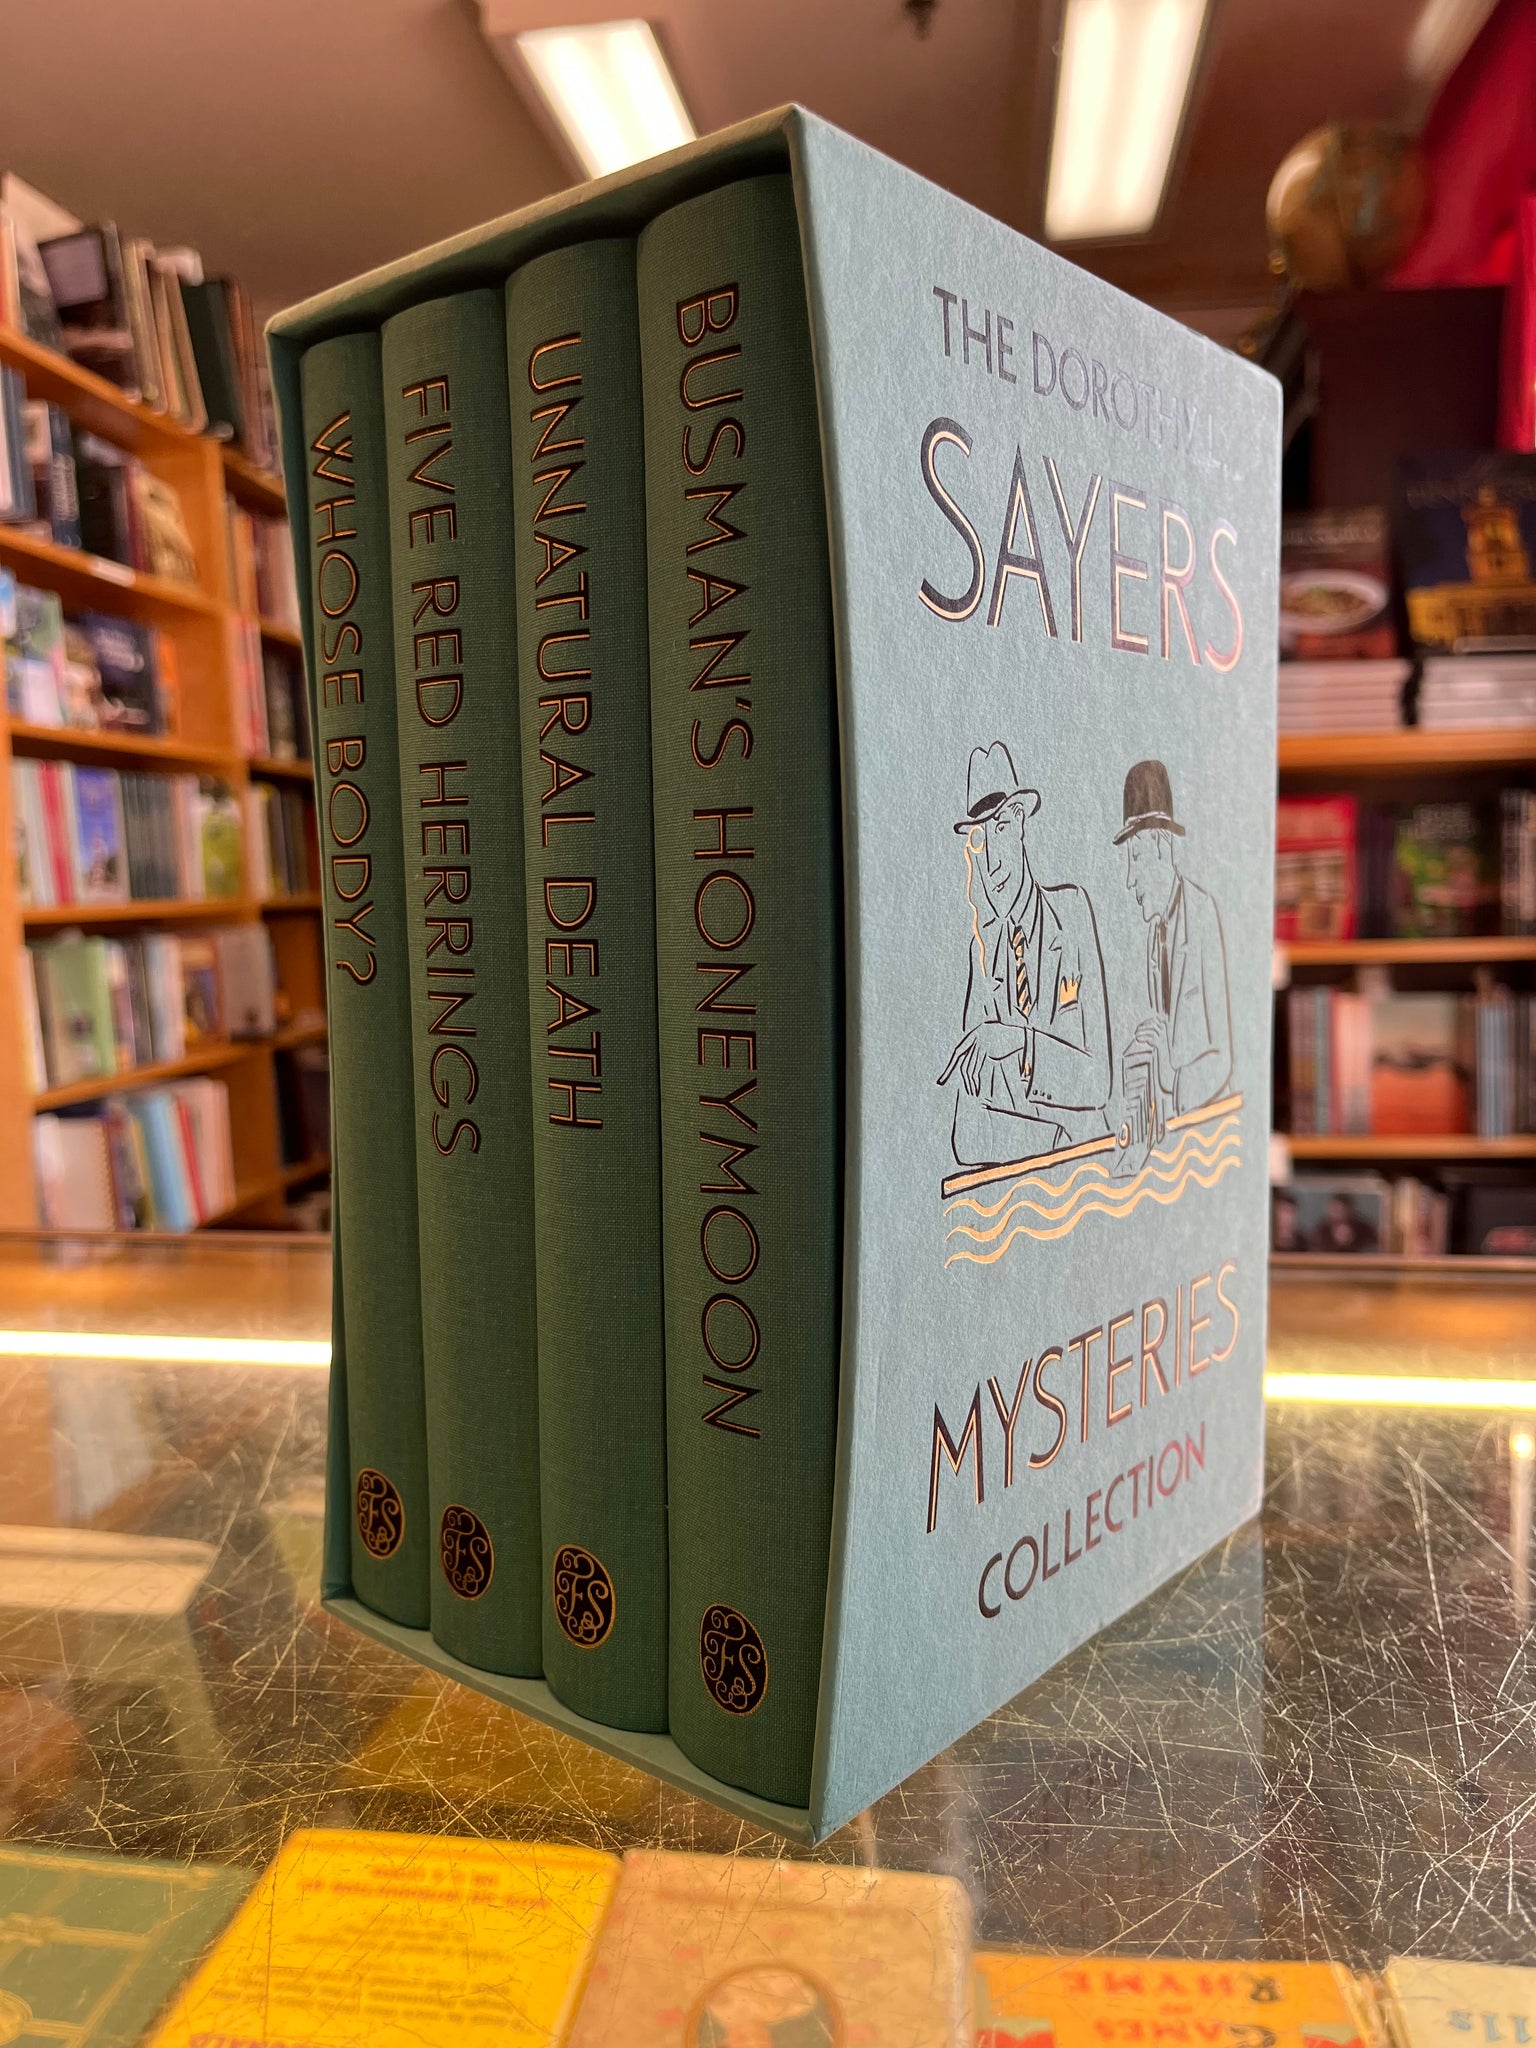 The Dorothy L. Sayers Mystery Collection